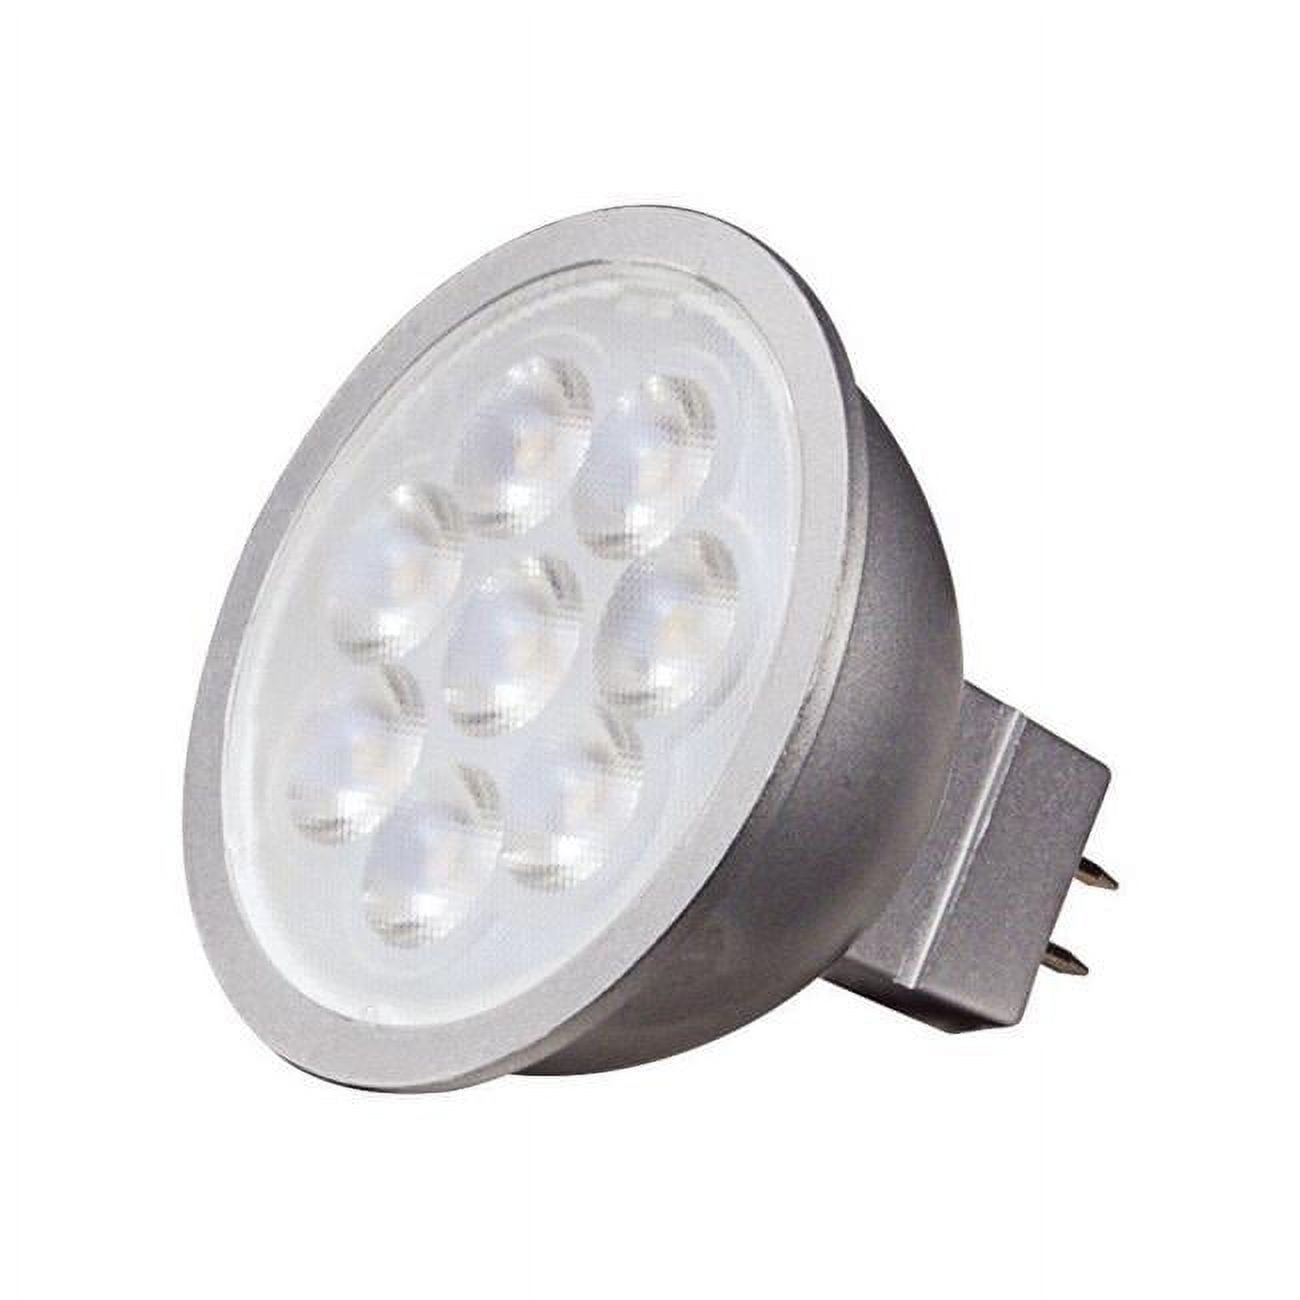 Picture of Satco 3862695 6.5W MR16 LED Bulb, 500 Lumens - Warm White